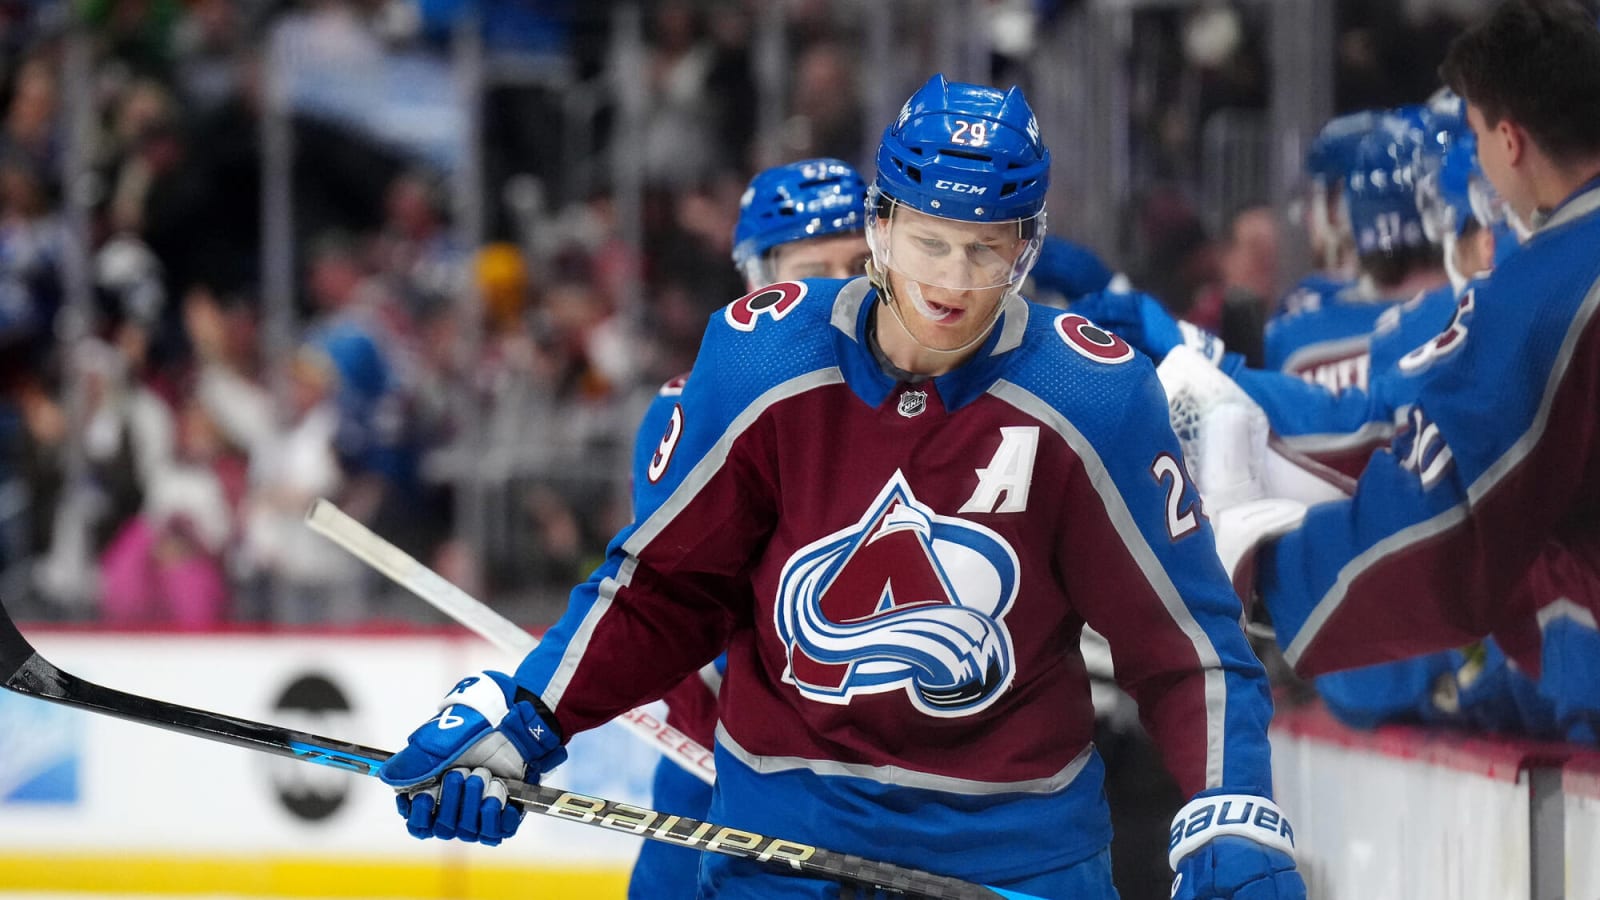 Do The Avalanche Have Two MVP’s In Their Organization?